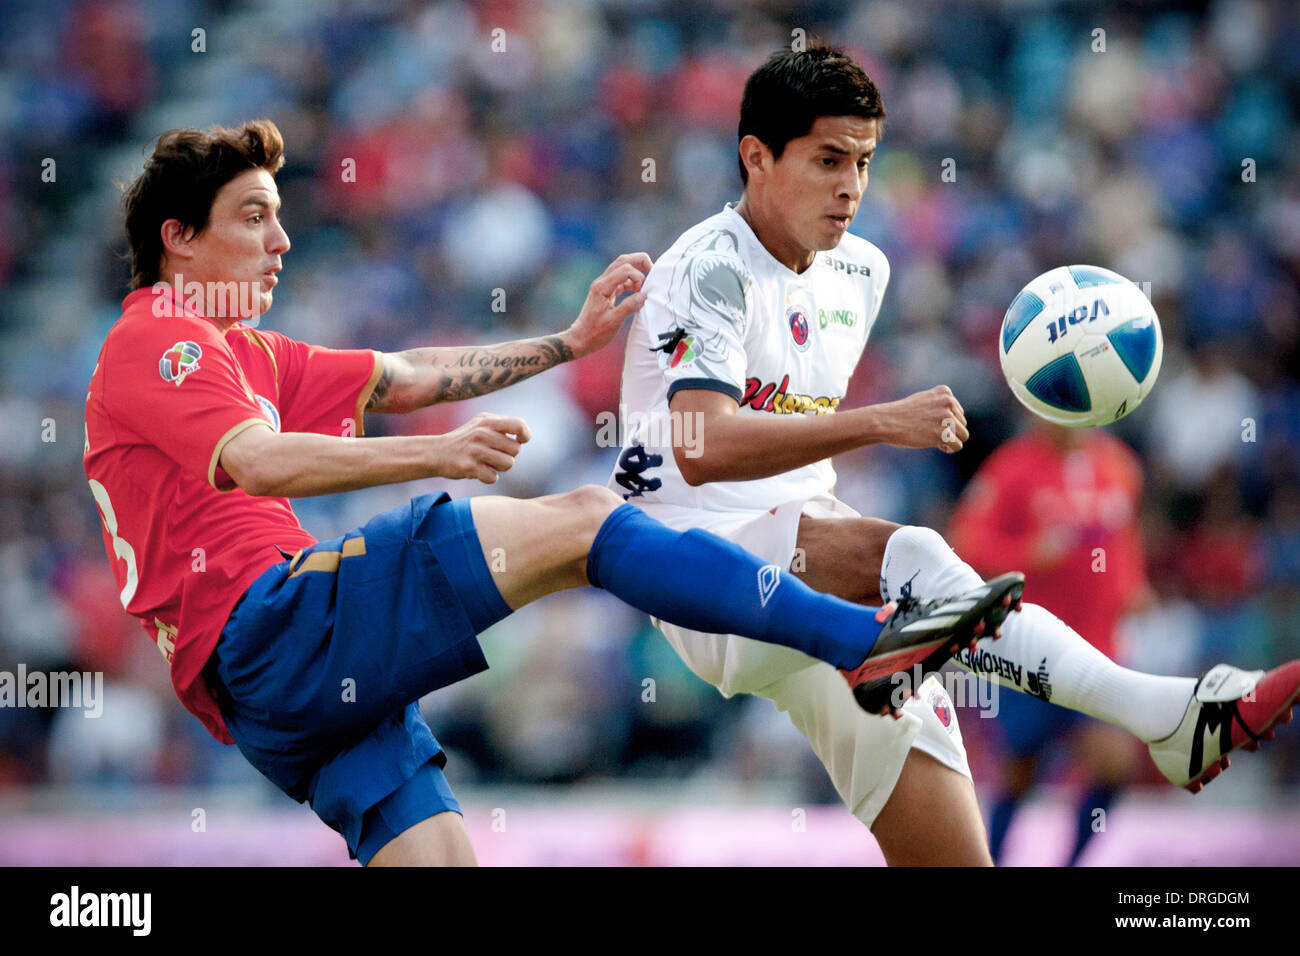 Mexico City, Mexico. 25th Jan, 2014. Mauro Formica (L) of Cruz Azul vies for the ball with Hugo Cid Sanchez (R) of Veracruz during their match of the MX League Closing Tournament 2014, held in the Azul Stadium in Mexico City, capital of Mexico, on Jan. 25, 2014. Credit:  Alejandro Ayala/Xinhua/Alamy Live News Stock Photo